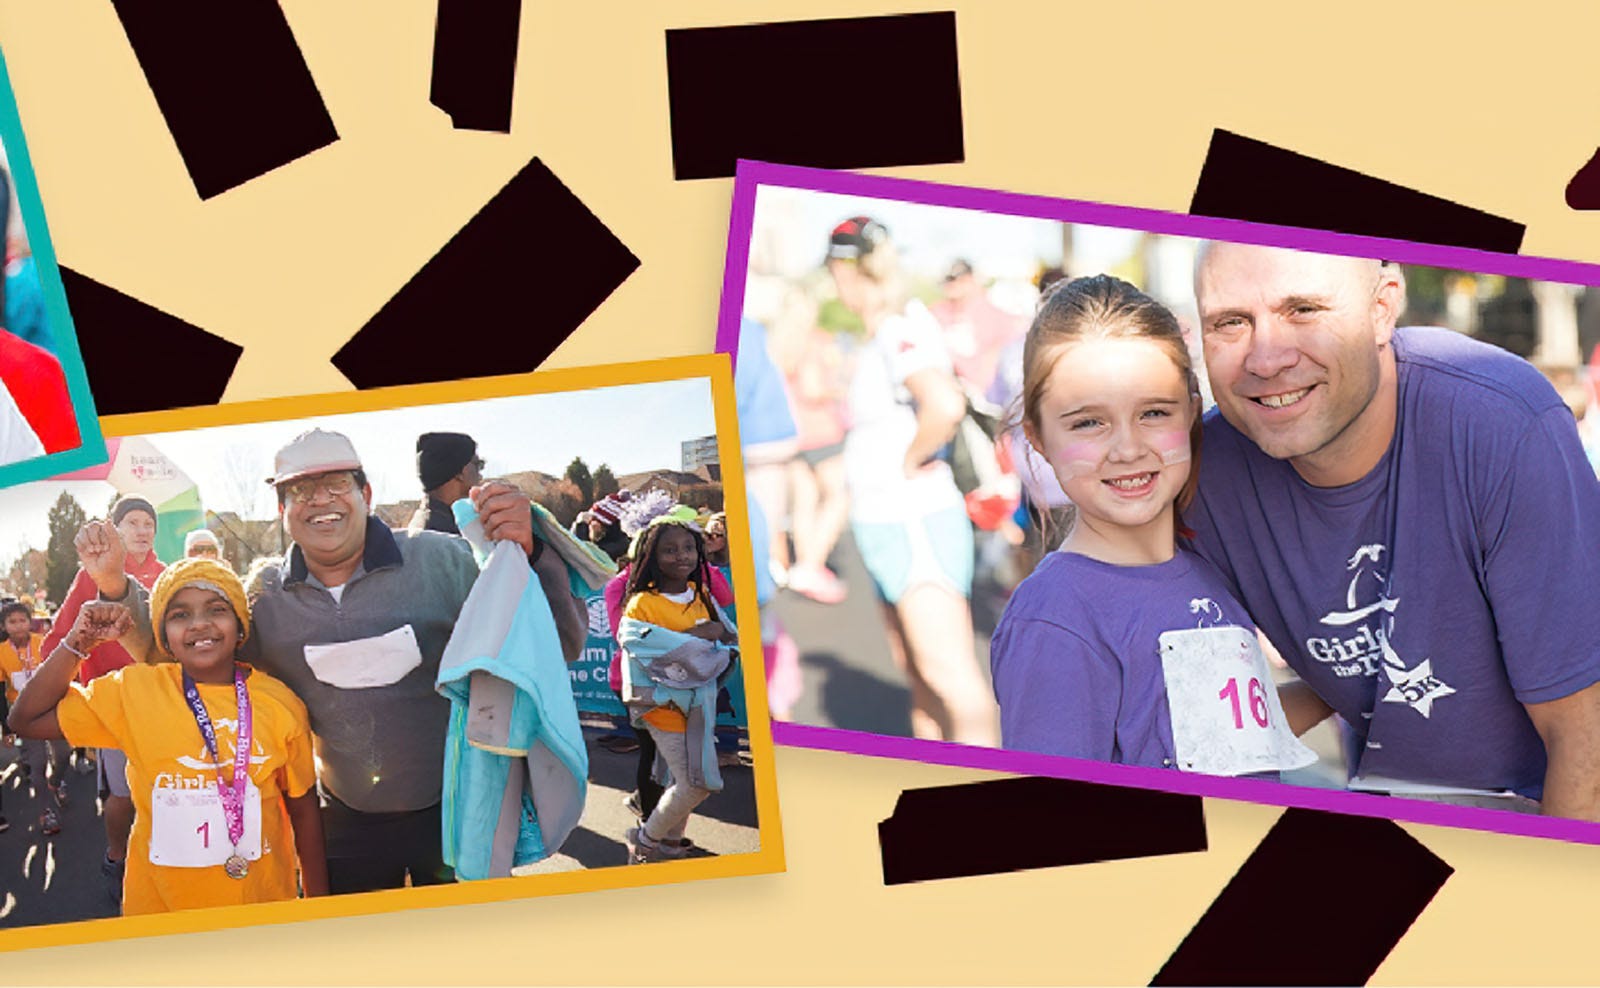 Collage of photos of families with girls at a Girls on the Run community event